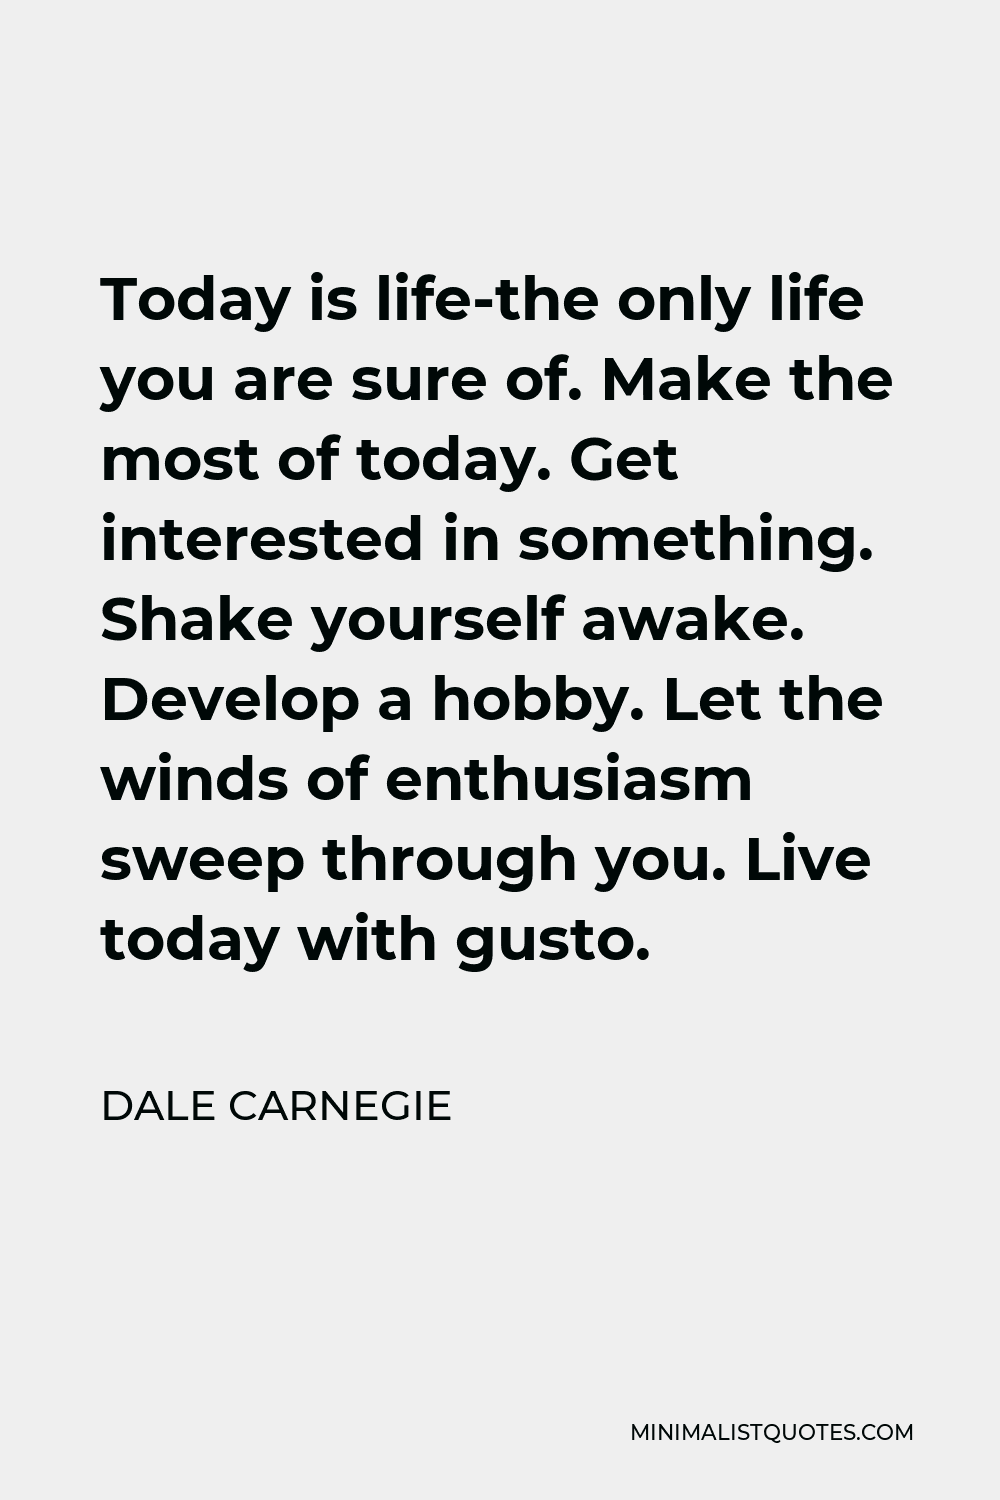 Dale Carnegie Quote - Today is life-the only life you are sure of. Make the most of today. Get interested in something. Shake yourself awake. Develop a hobby. Let the winds of enthusiasm sweep through you. Live today with gusto.